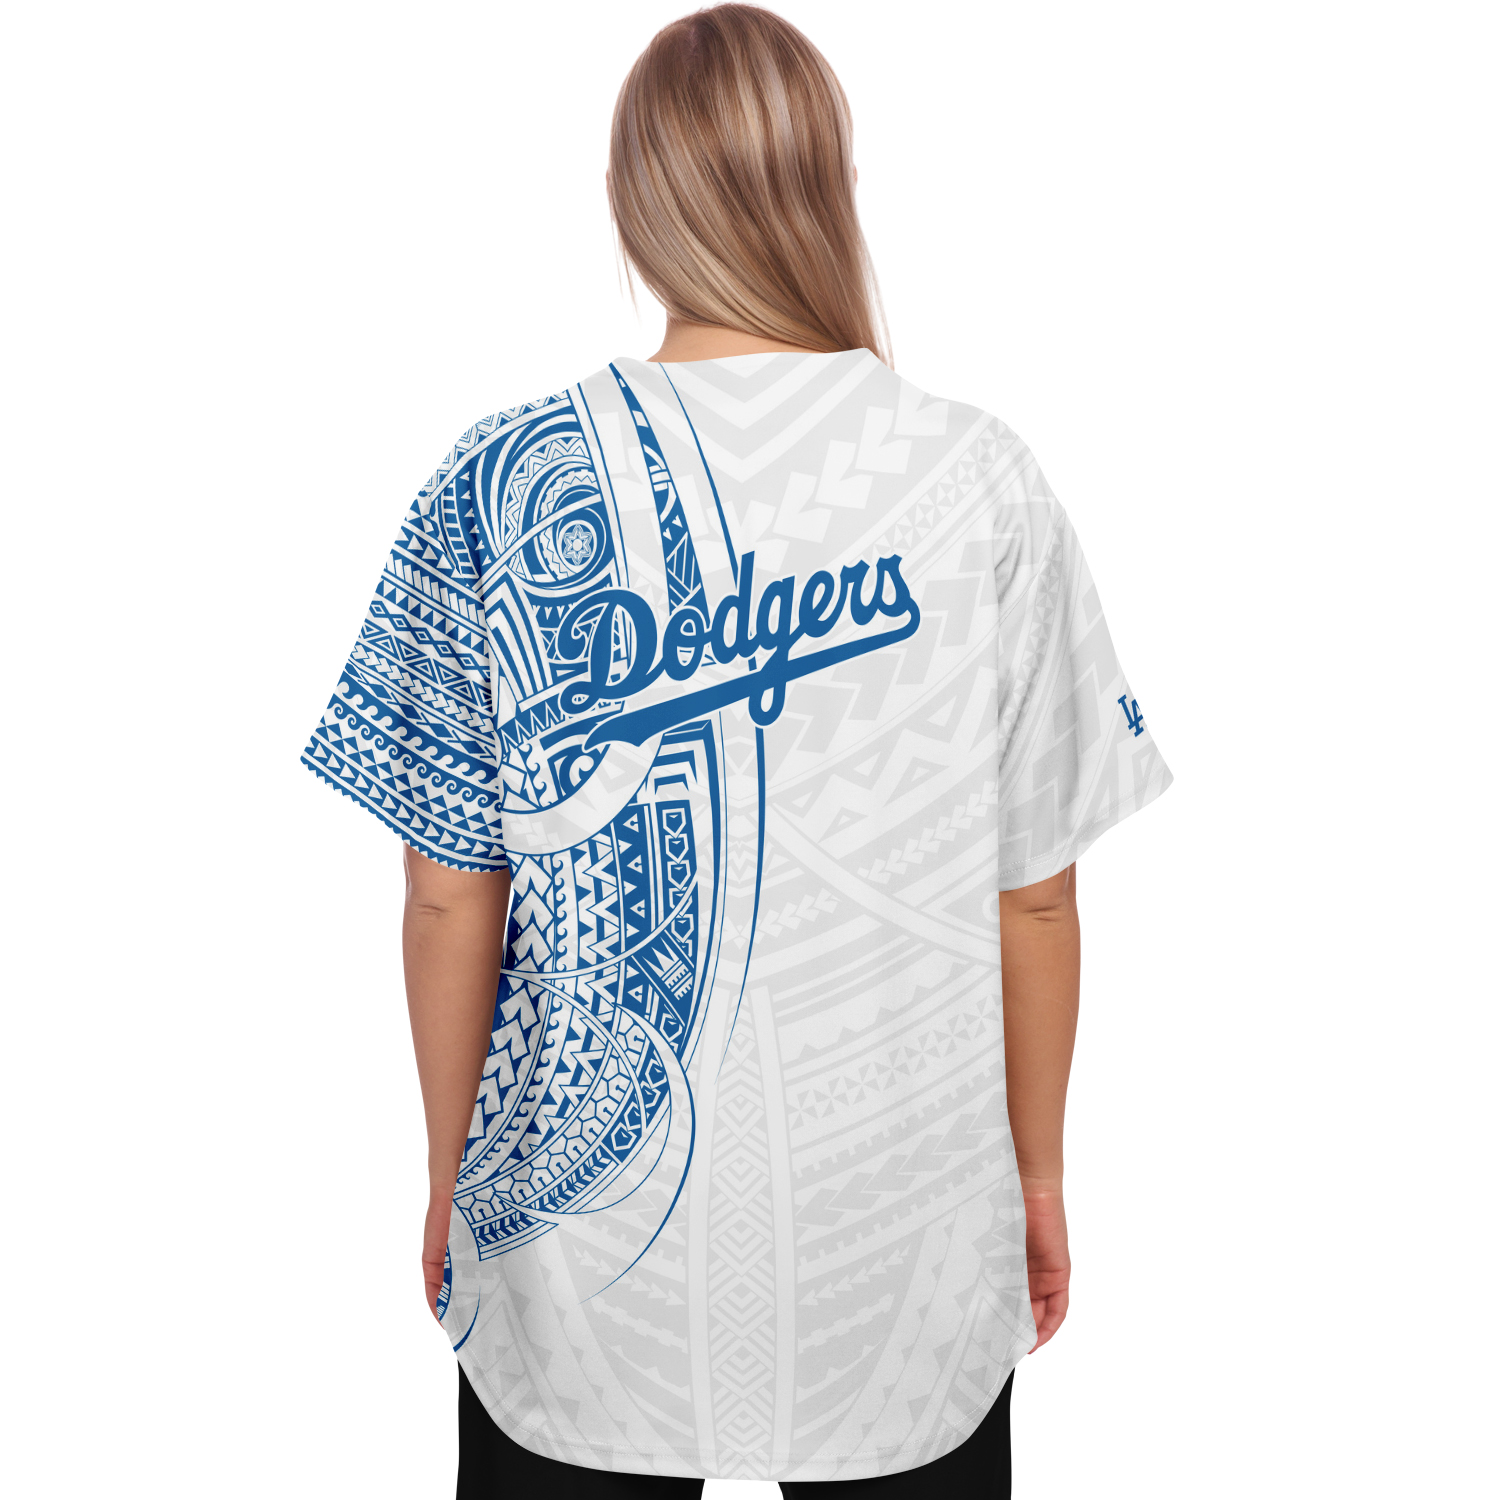 Buy MLB Women's Los Angeles Dodgers Short Sleeve 5 Button Synthetic Replica Baseball  Jersey (White/Pink Splash, Medium) Online at Low Prices in India 